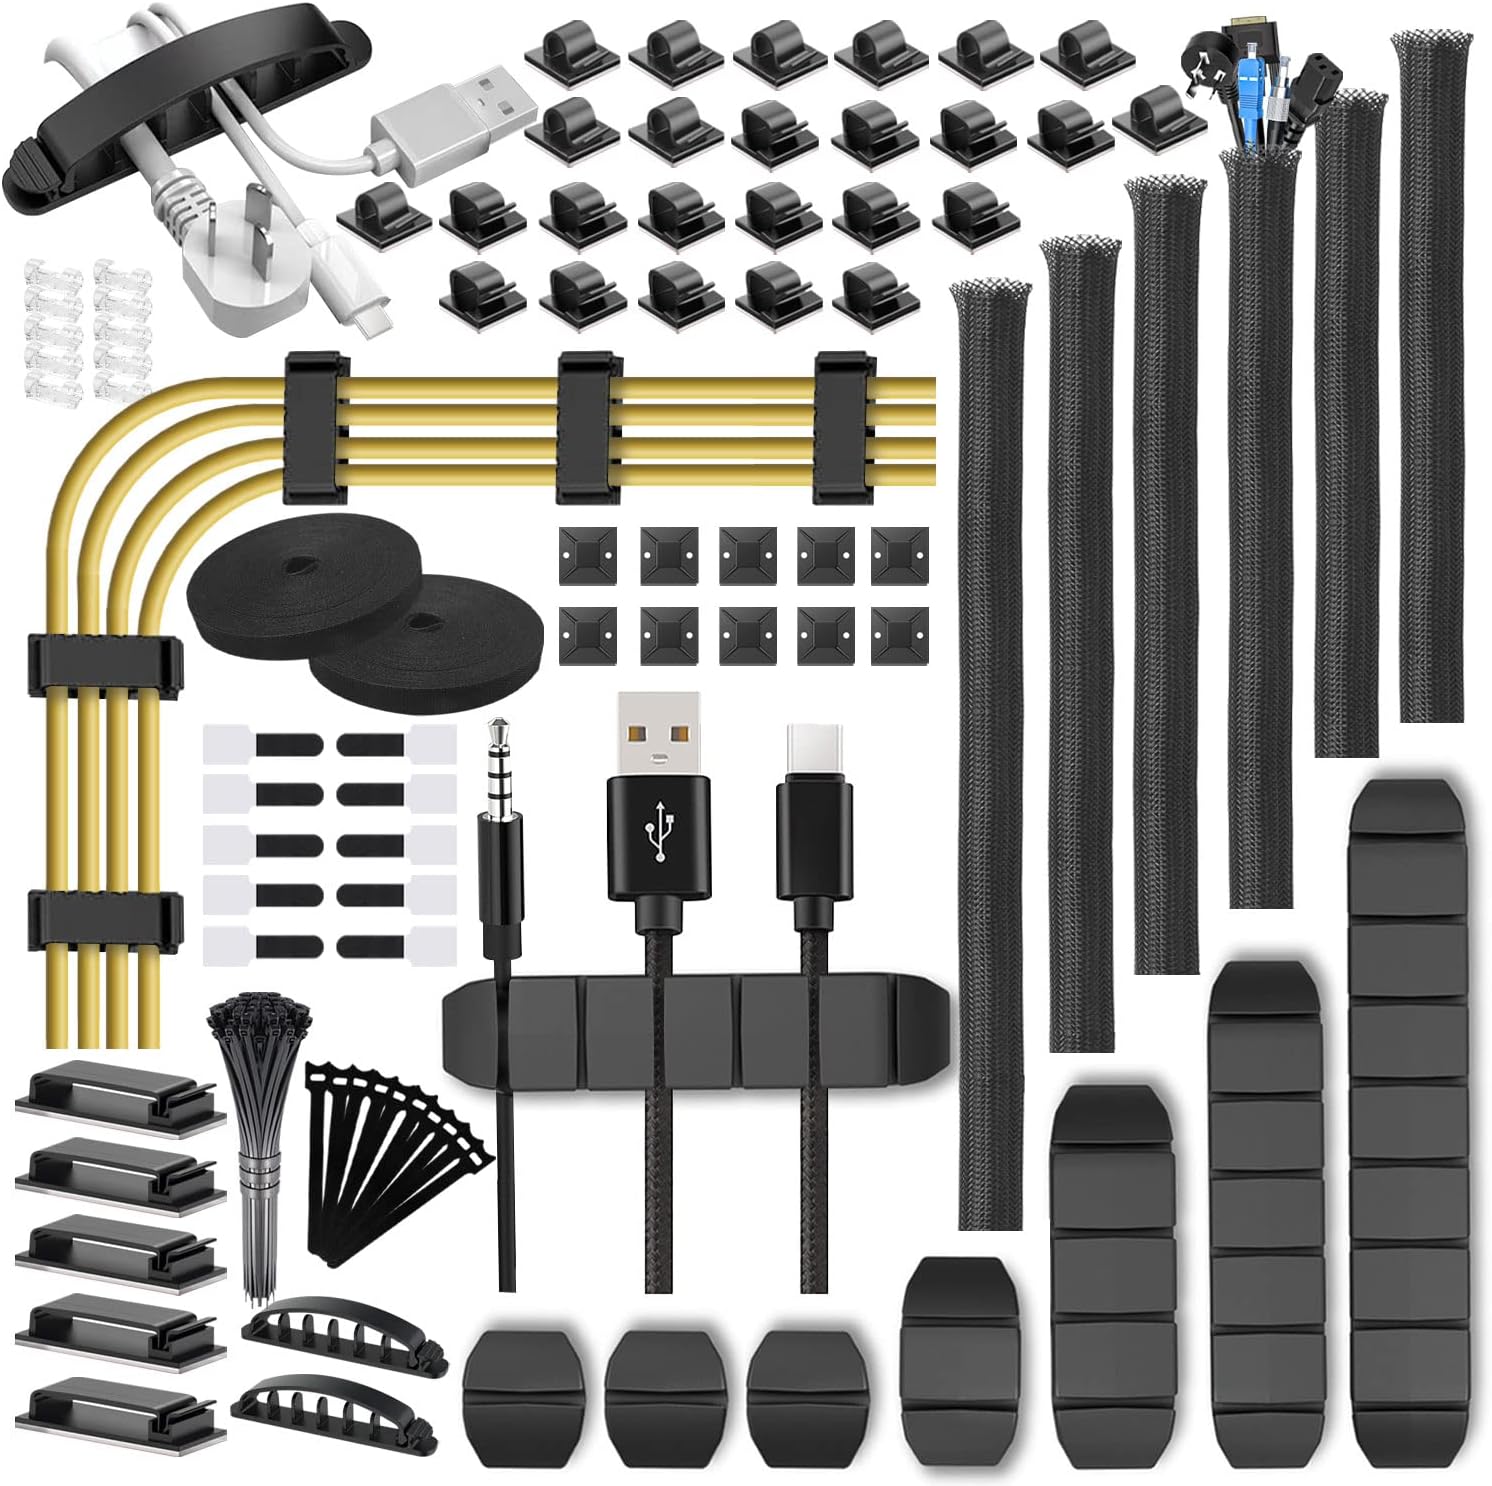 188 Pcs Cable Management Kit, 6 Cable Sleeves 50 Cord [...]